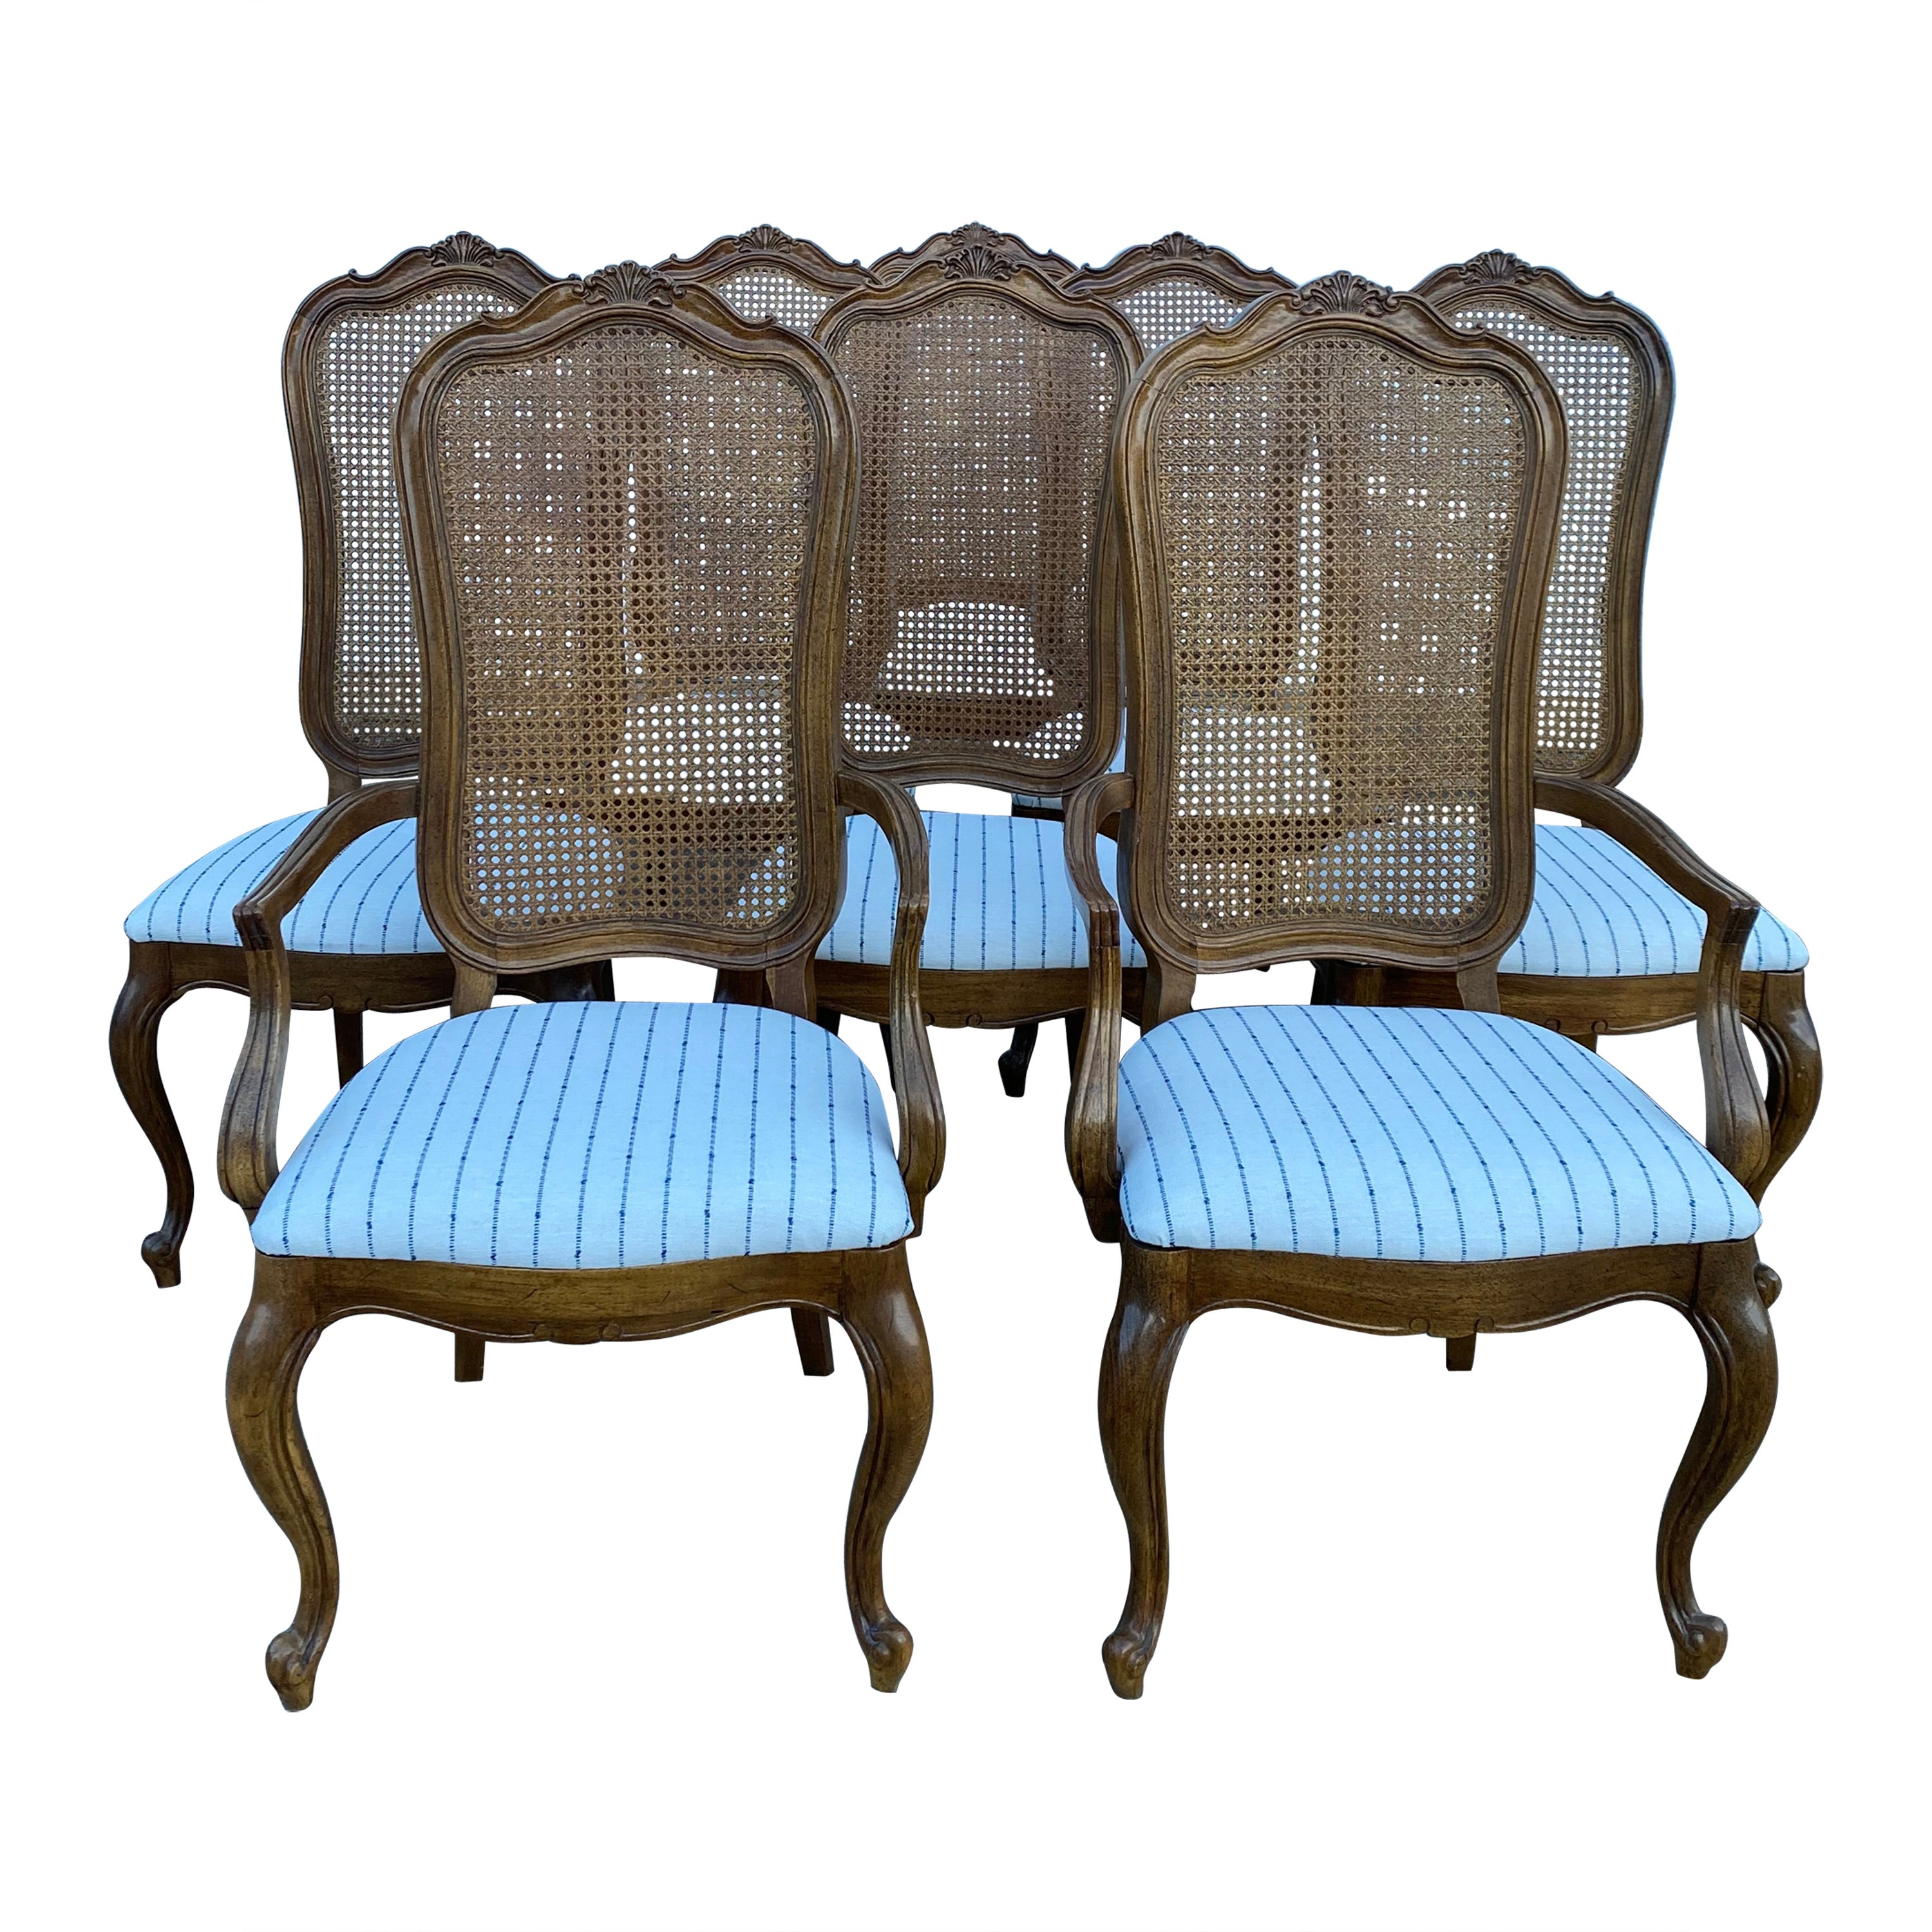 Set of 8 Thomasville French Provincial Cane Back Dining Chairs